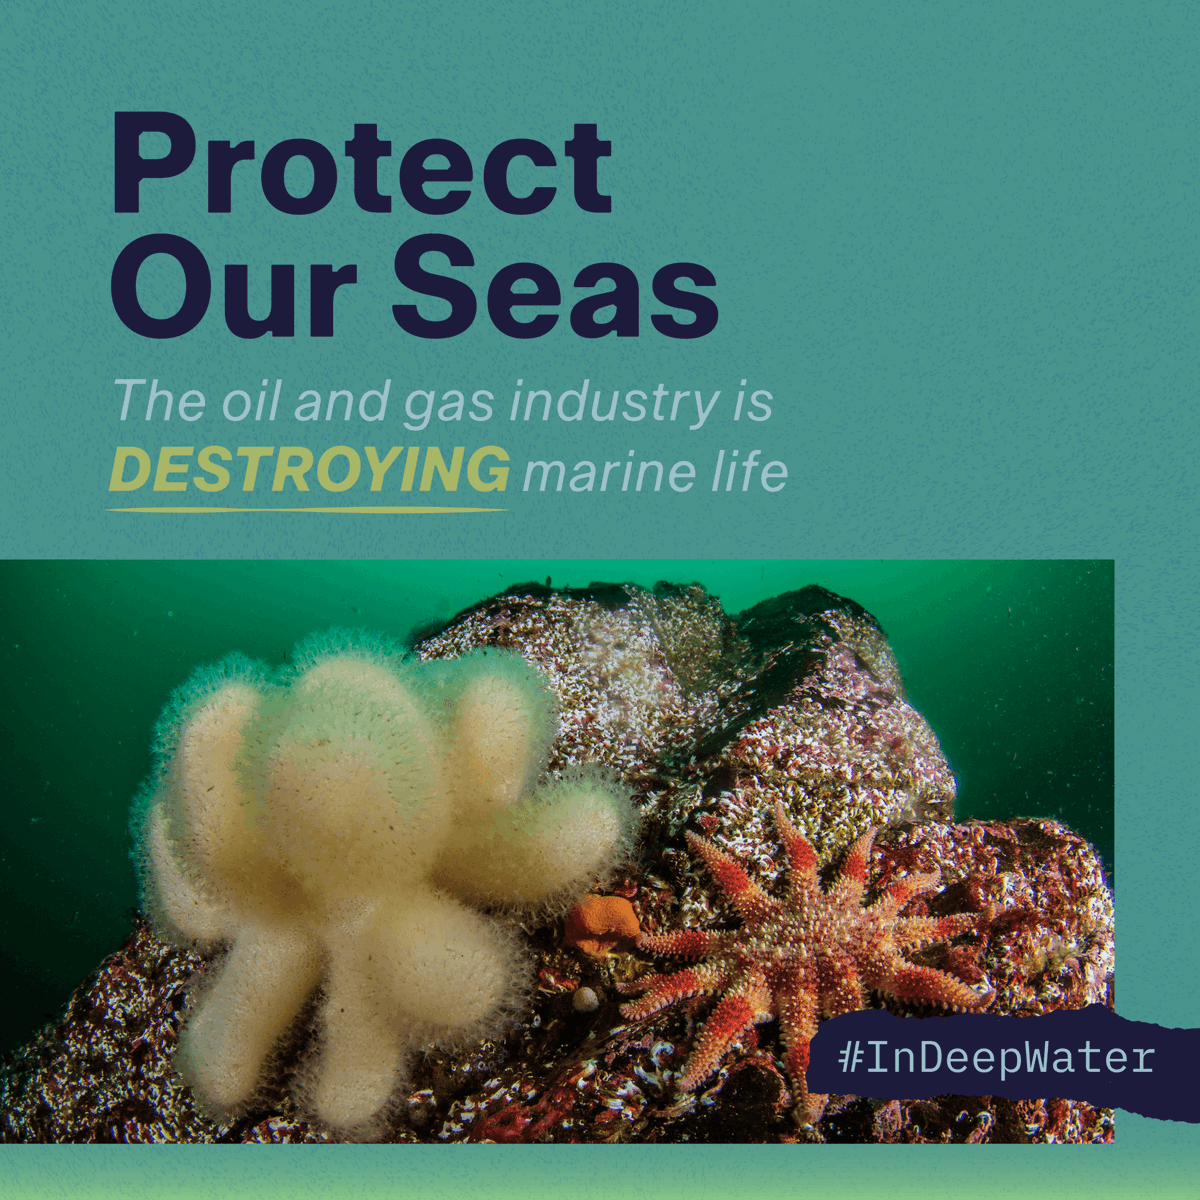 The Rosebank oilfield will destroy marine wildlife and habitats, whilst blowing through UK climate targets. It will:

1️⃣ Threaten vulnerable marine life. An oil spill could risk serious impact to at least 16 Marine Protected Areas, causing irreparable damage to our seas. 🐋